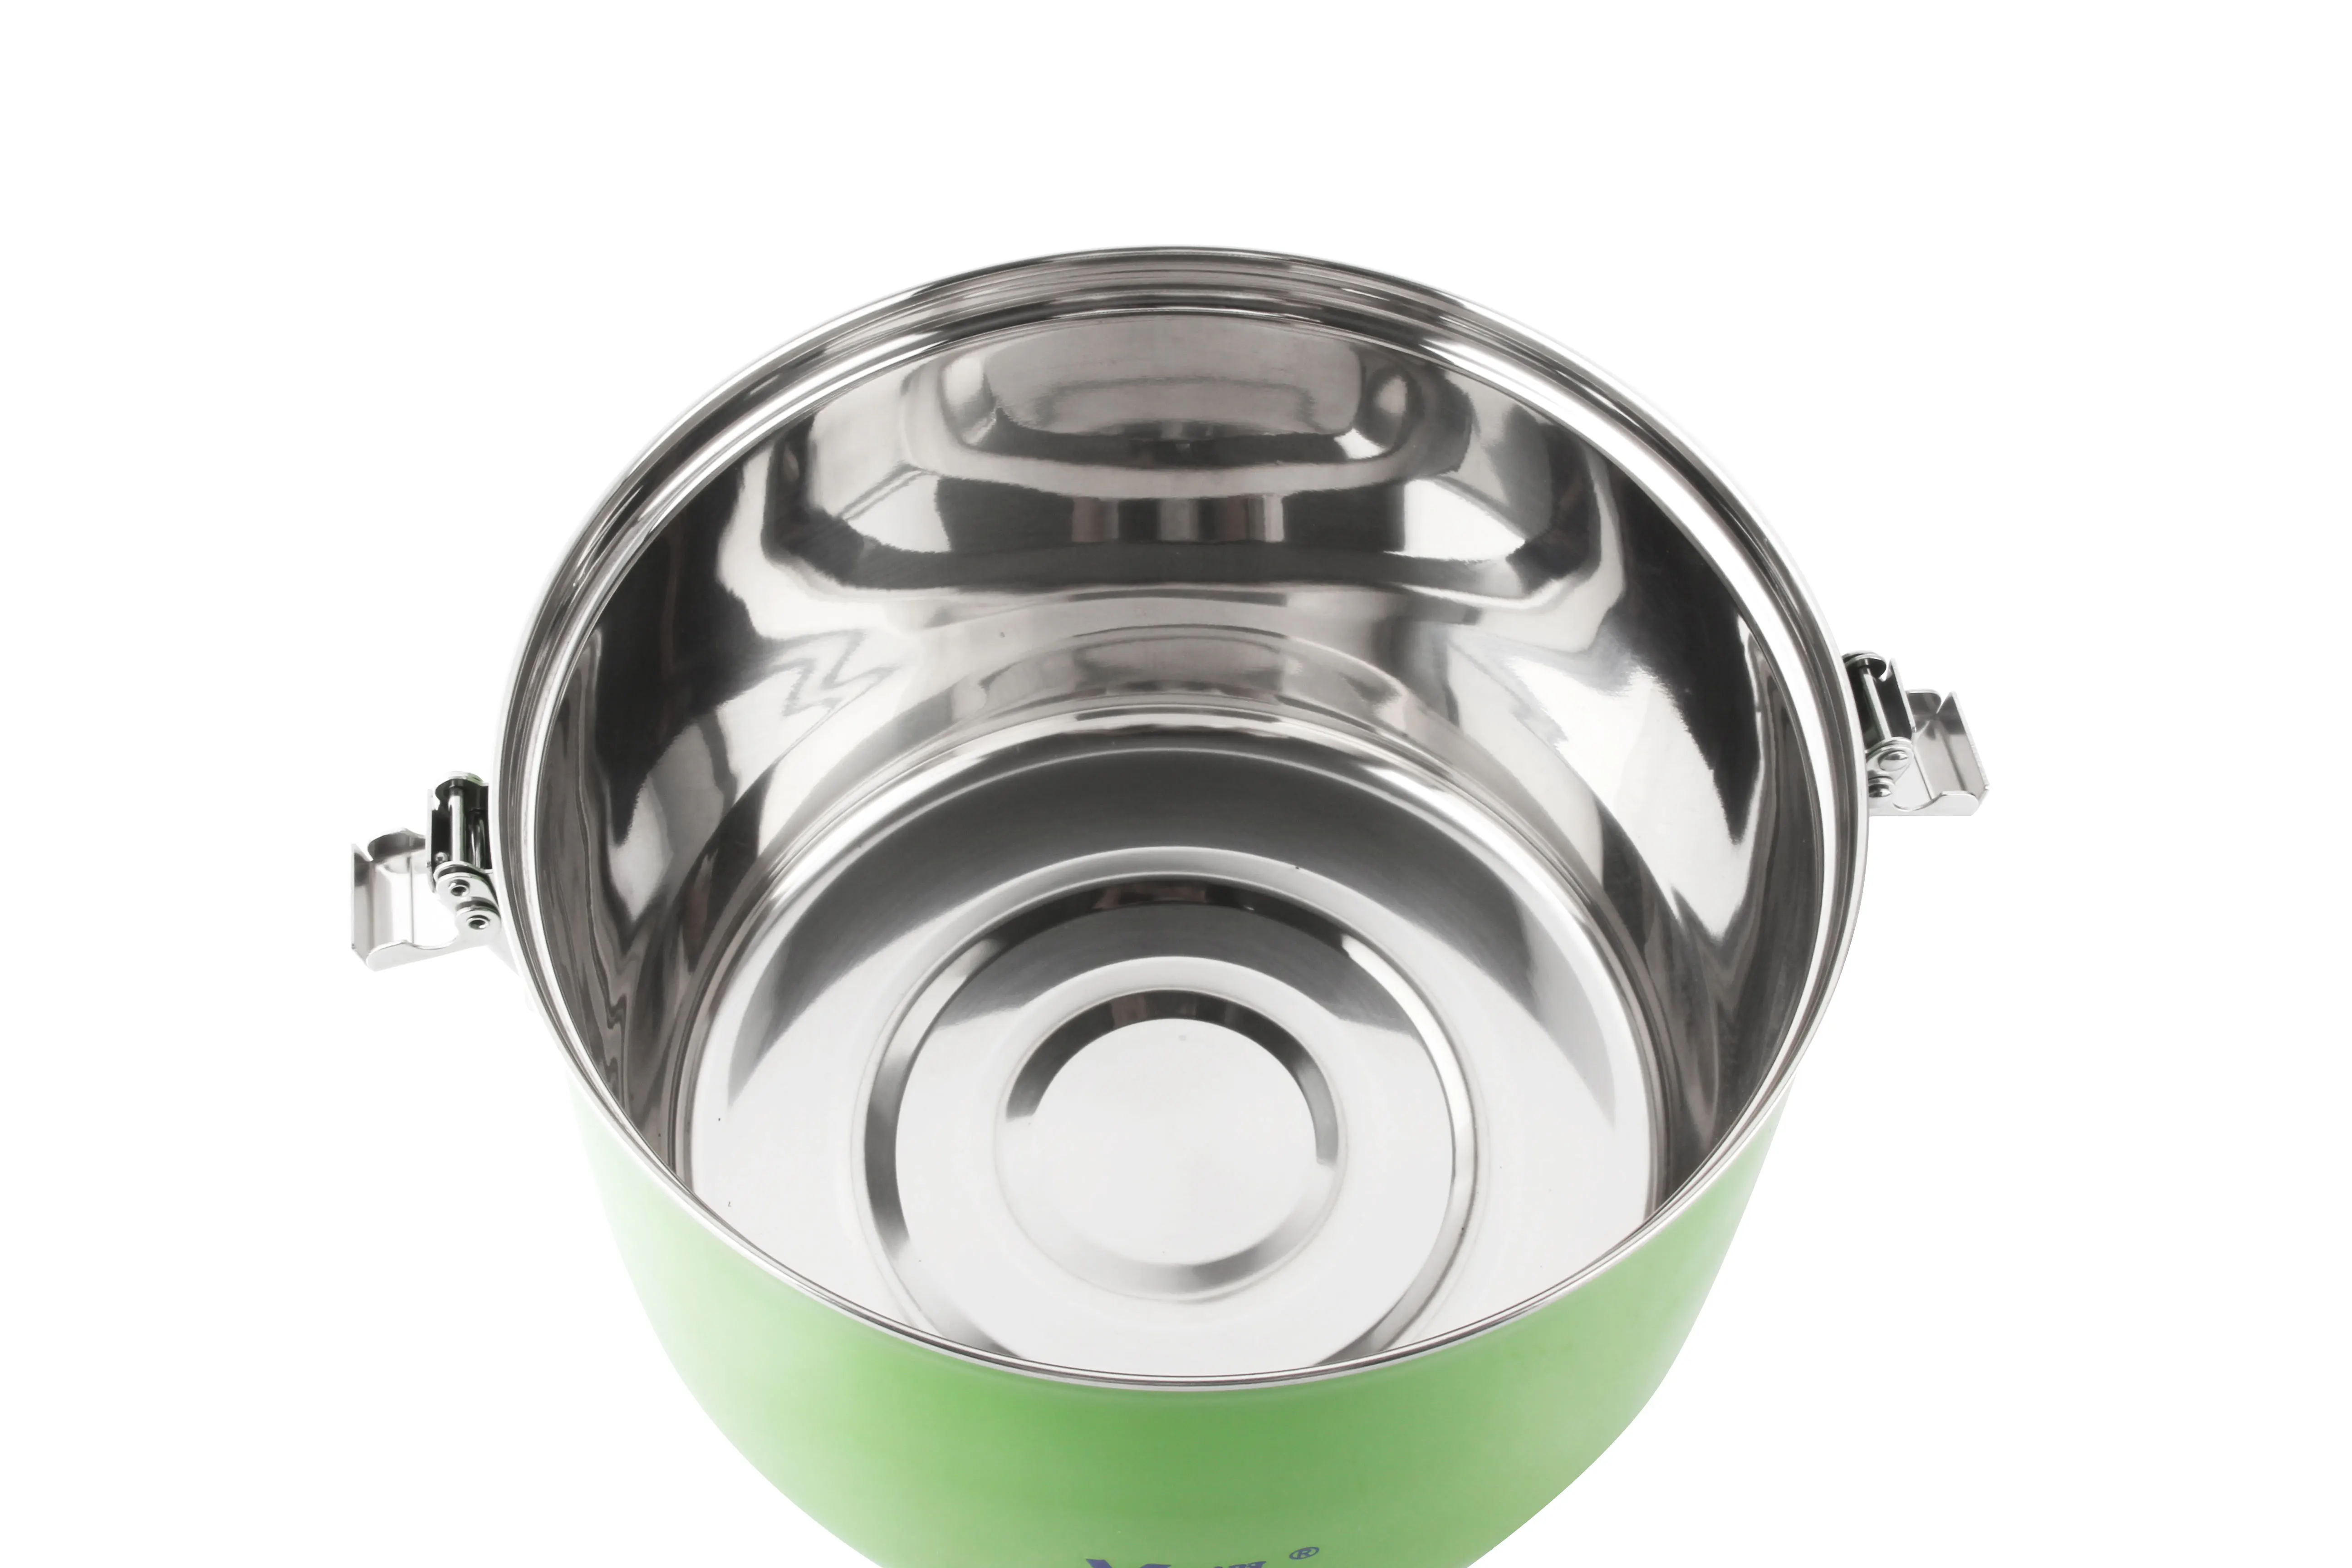 Chinese eco-Friendly new innovative Stainless Steel cooking pot thermal cooker flame free cooking pot LIDL amazon